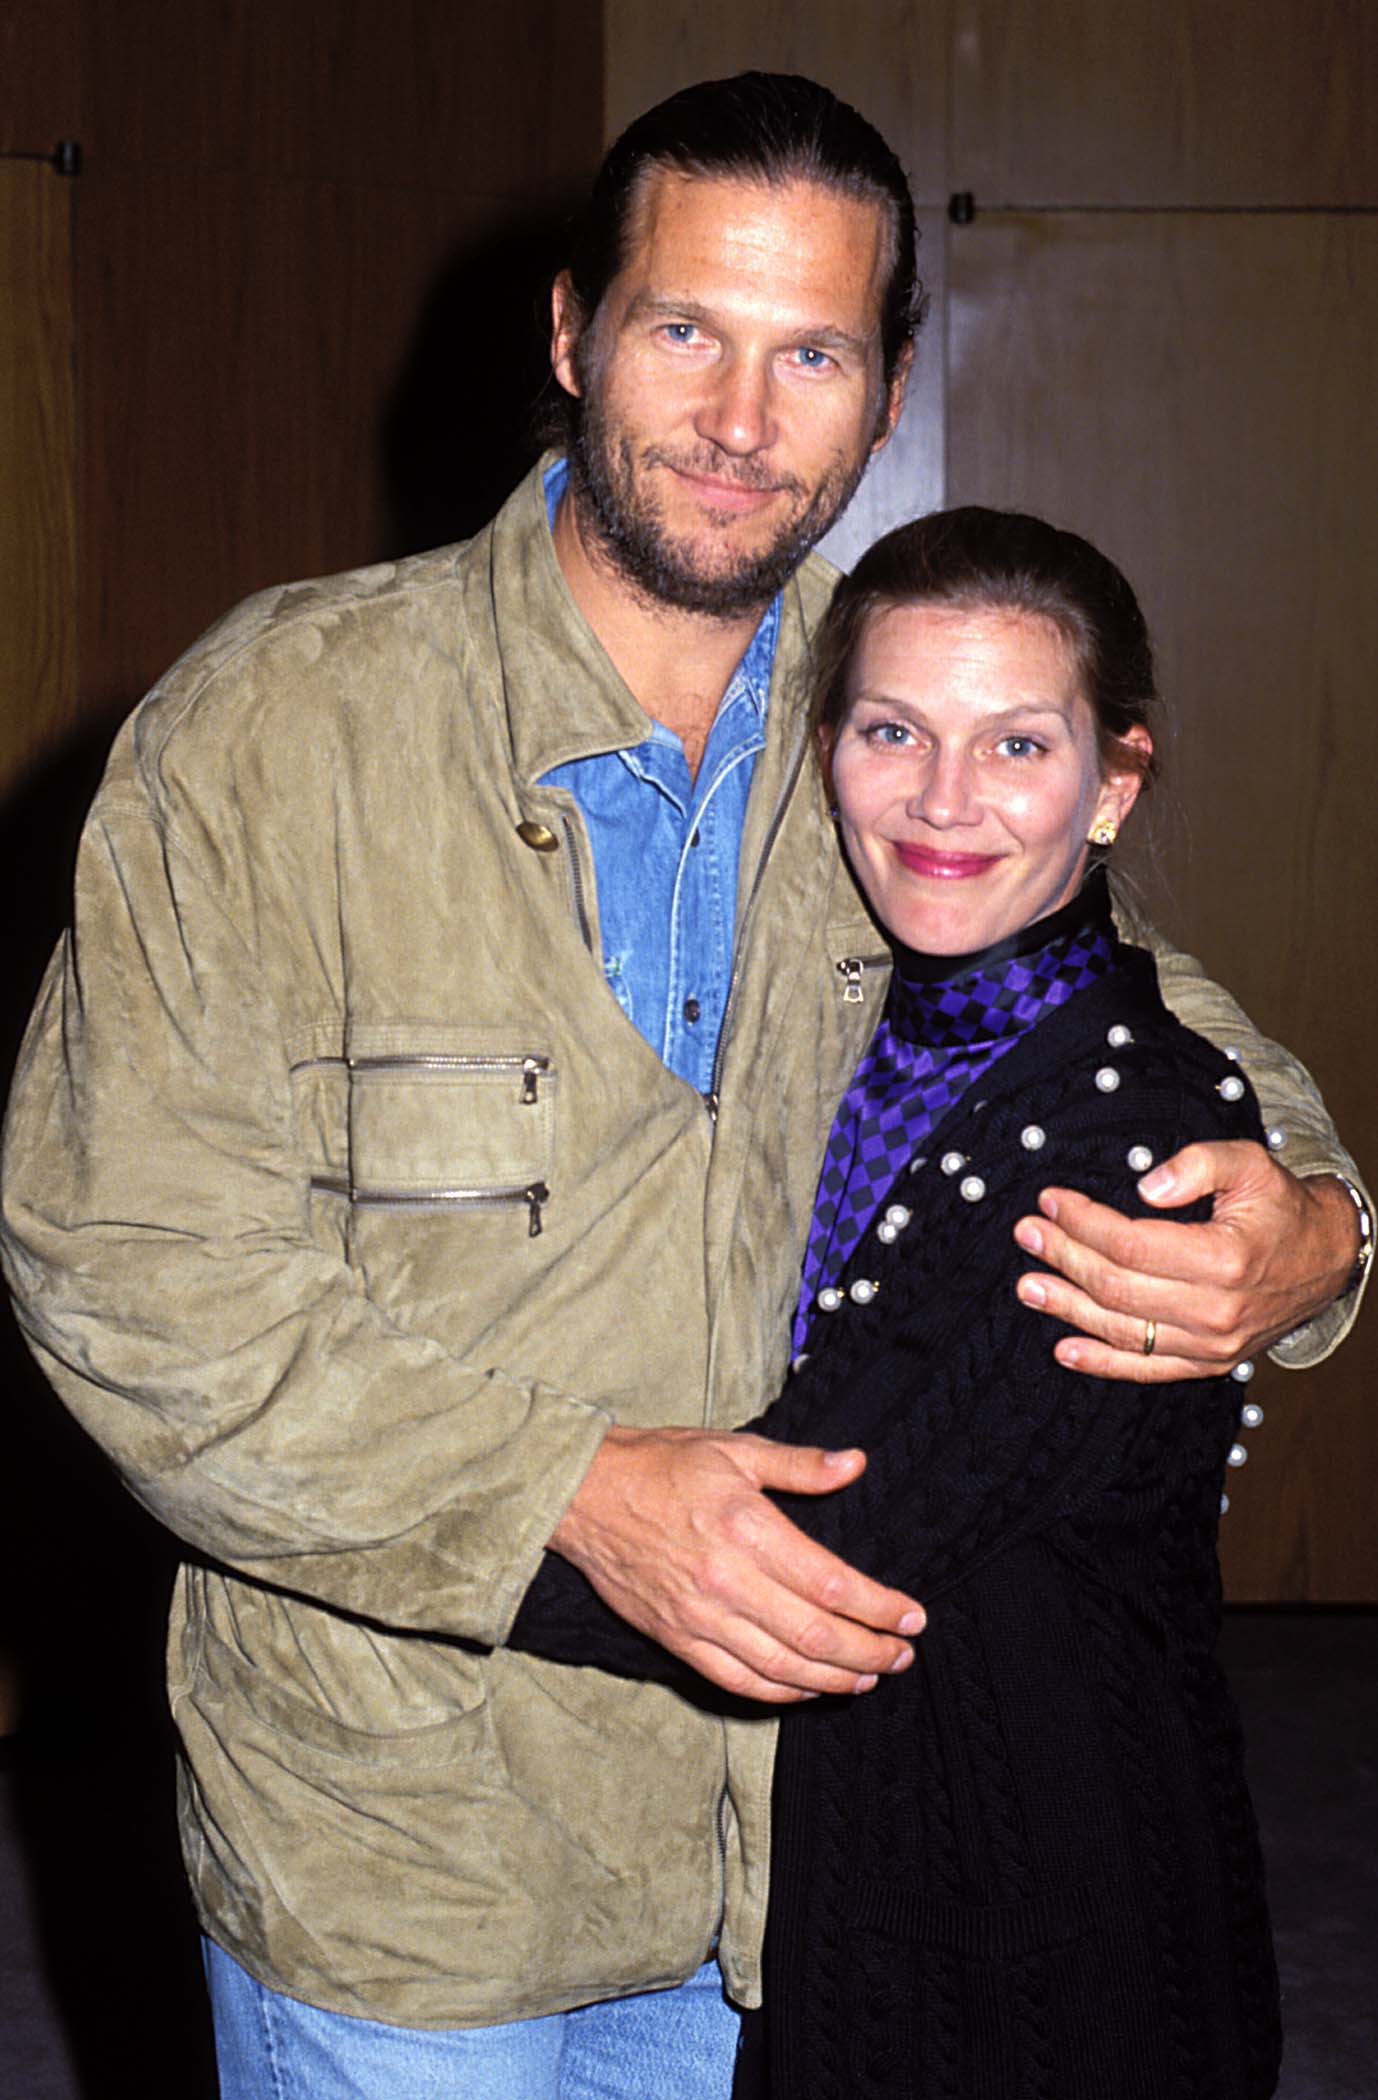 Jeff Bridges and Susan Bridges during HBO's "James Brady" premiere in Los Angeles, California, on October 11, 1991. | Source: Getty Images